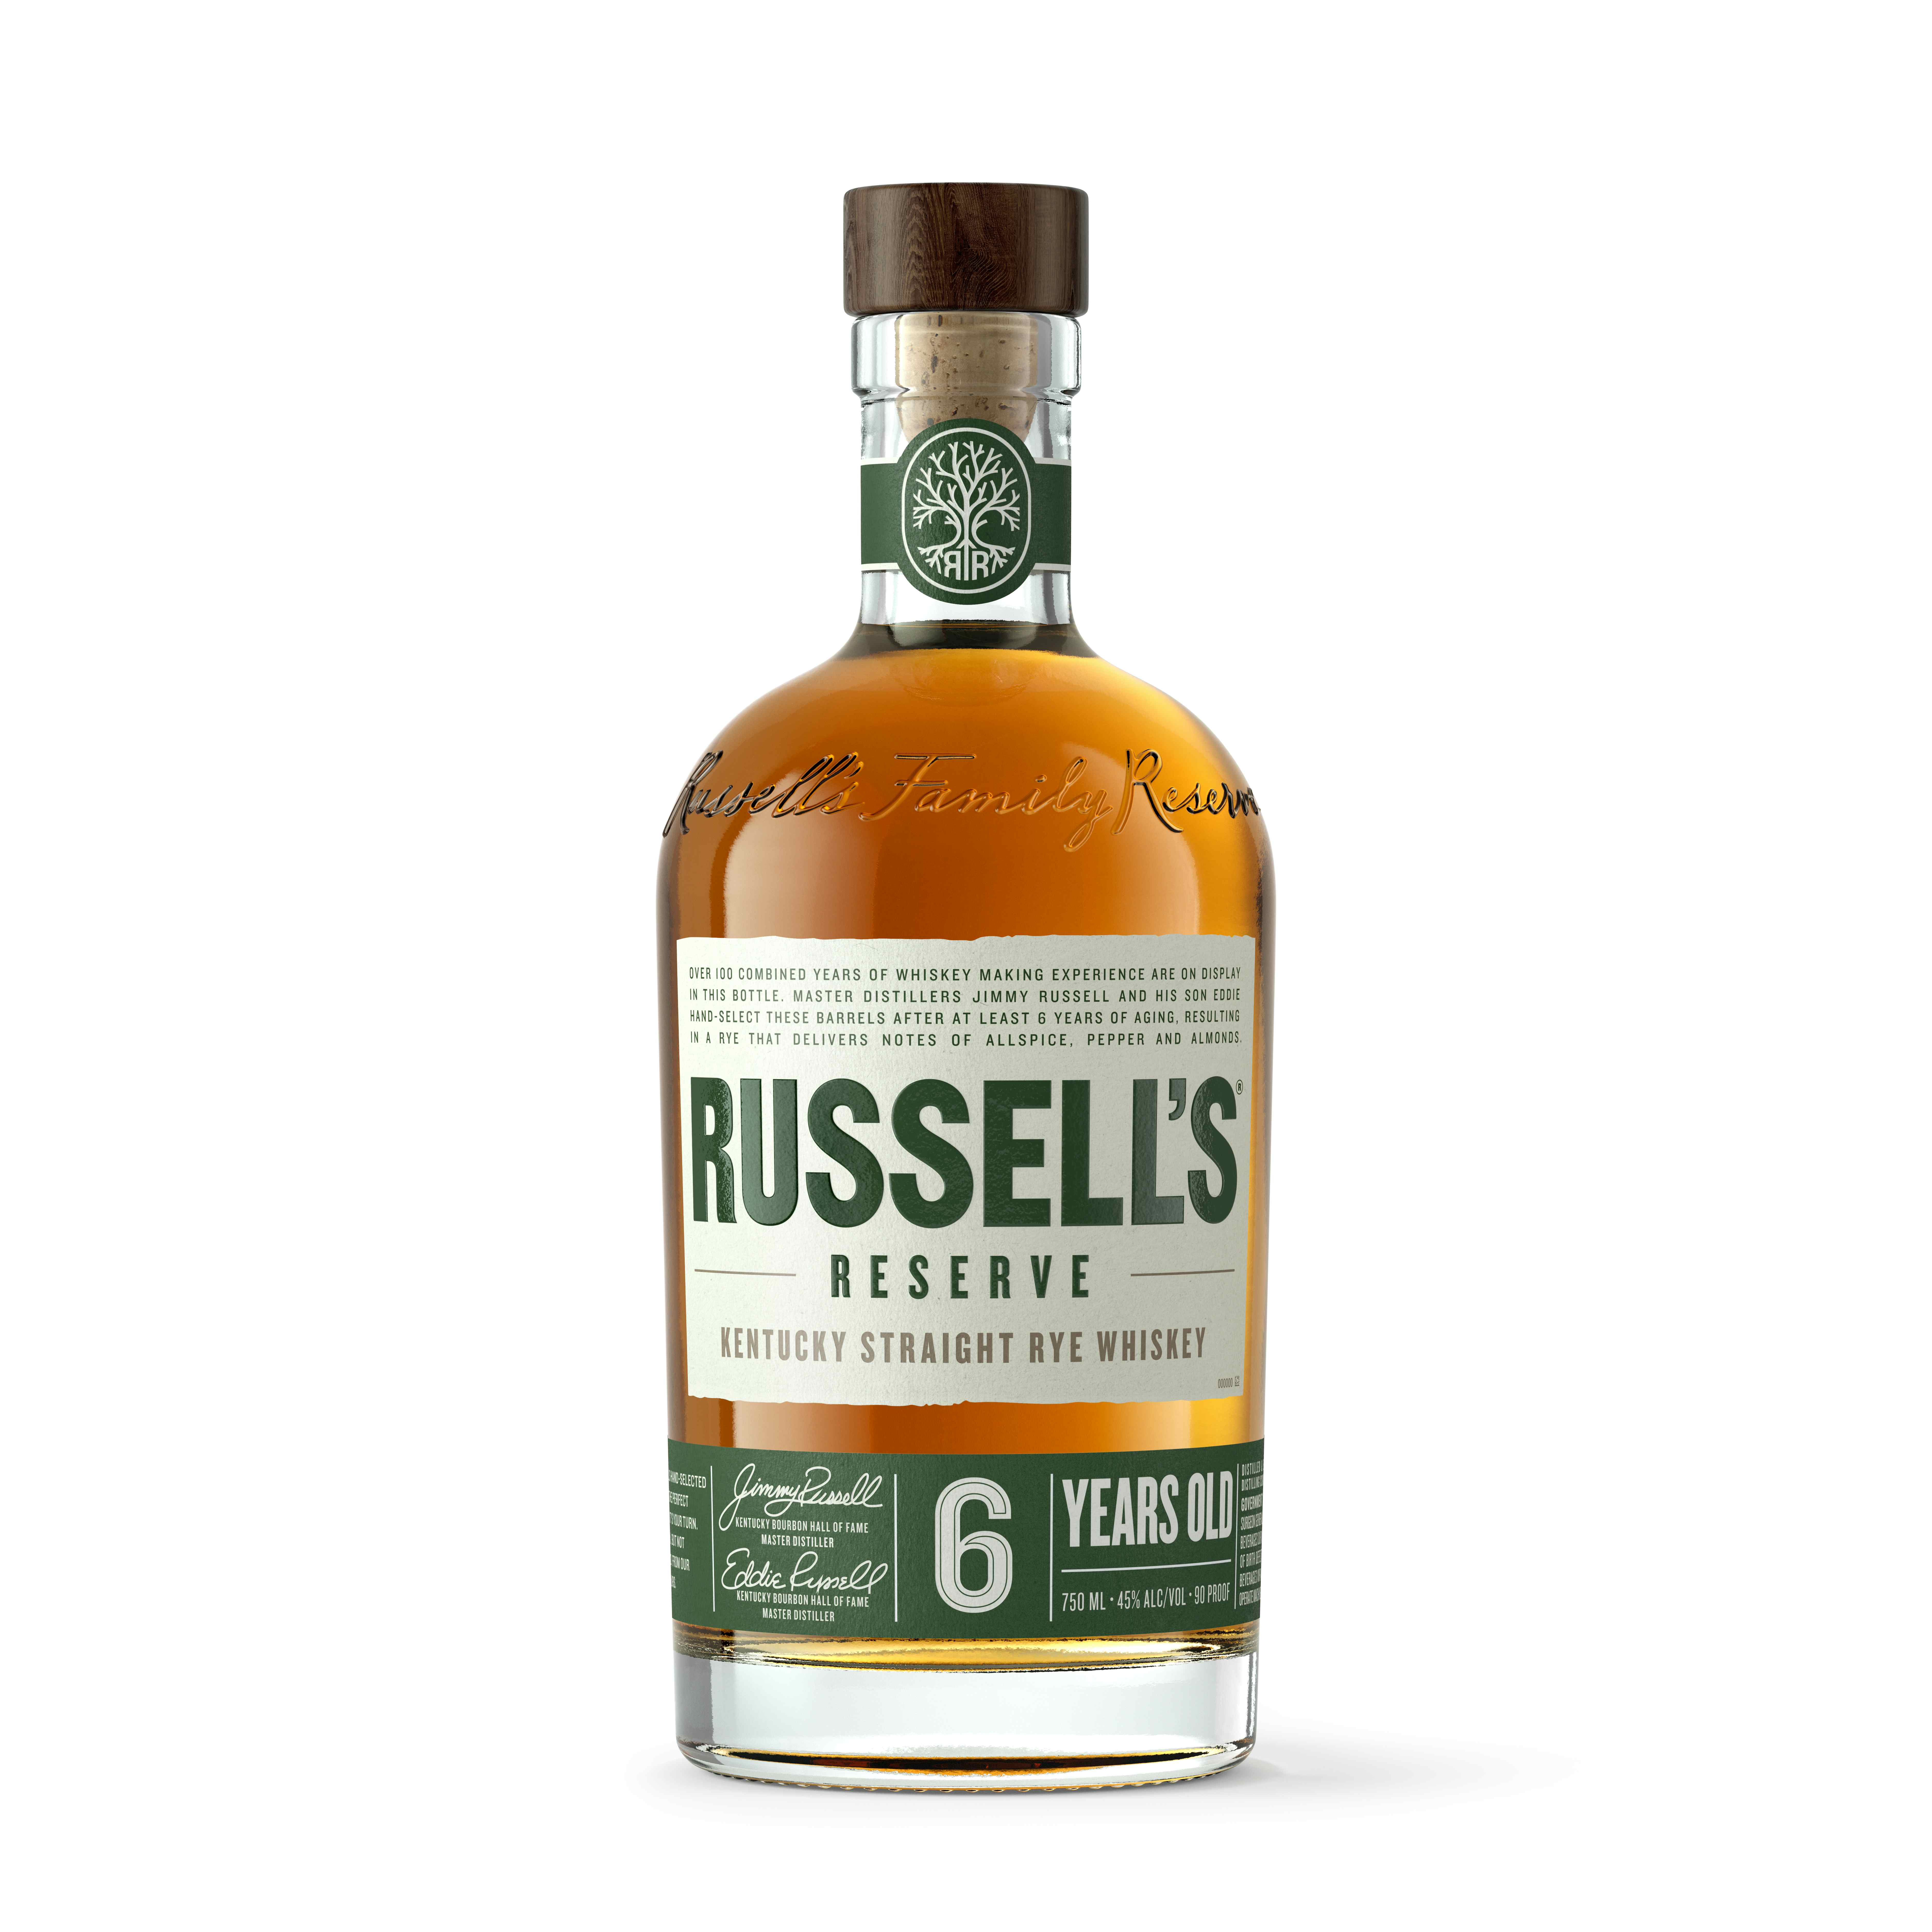 Russell's Reserve 6 Year Old Rye